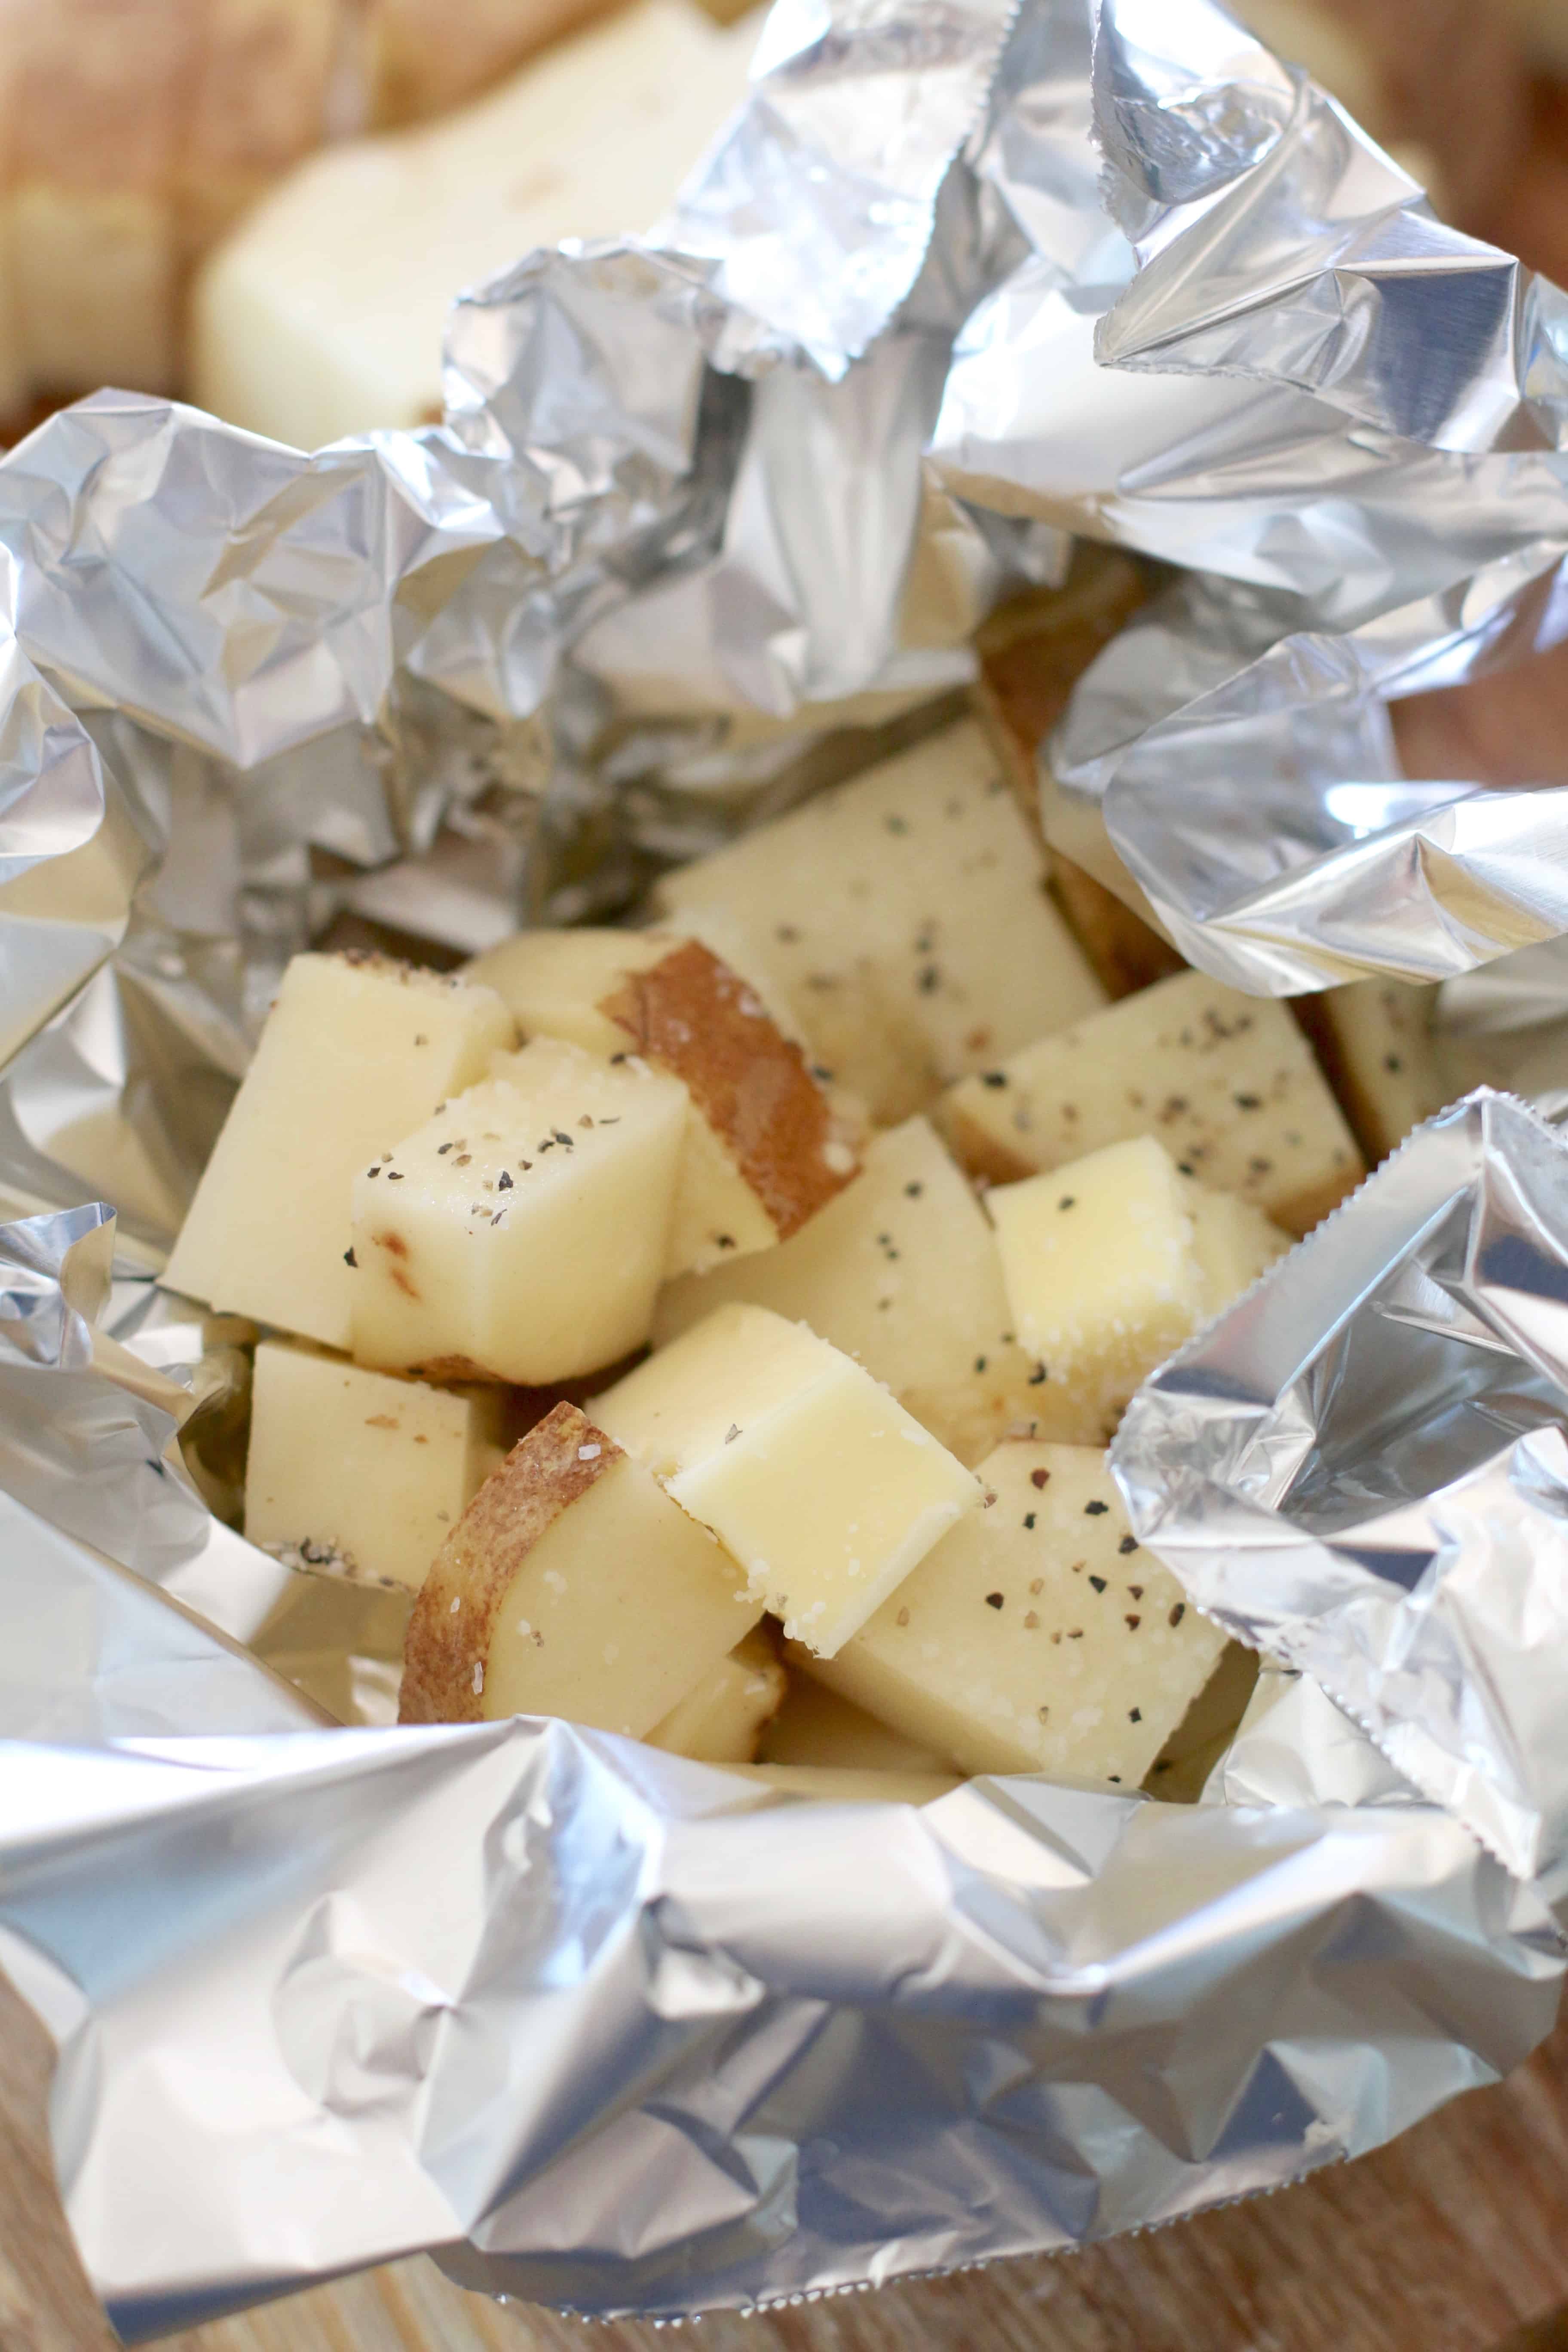 diced potatoes, butter and salt and pepper shown in aluminum foil.